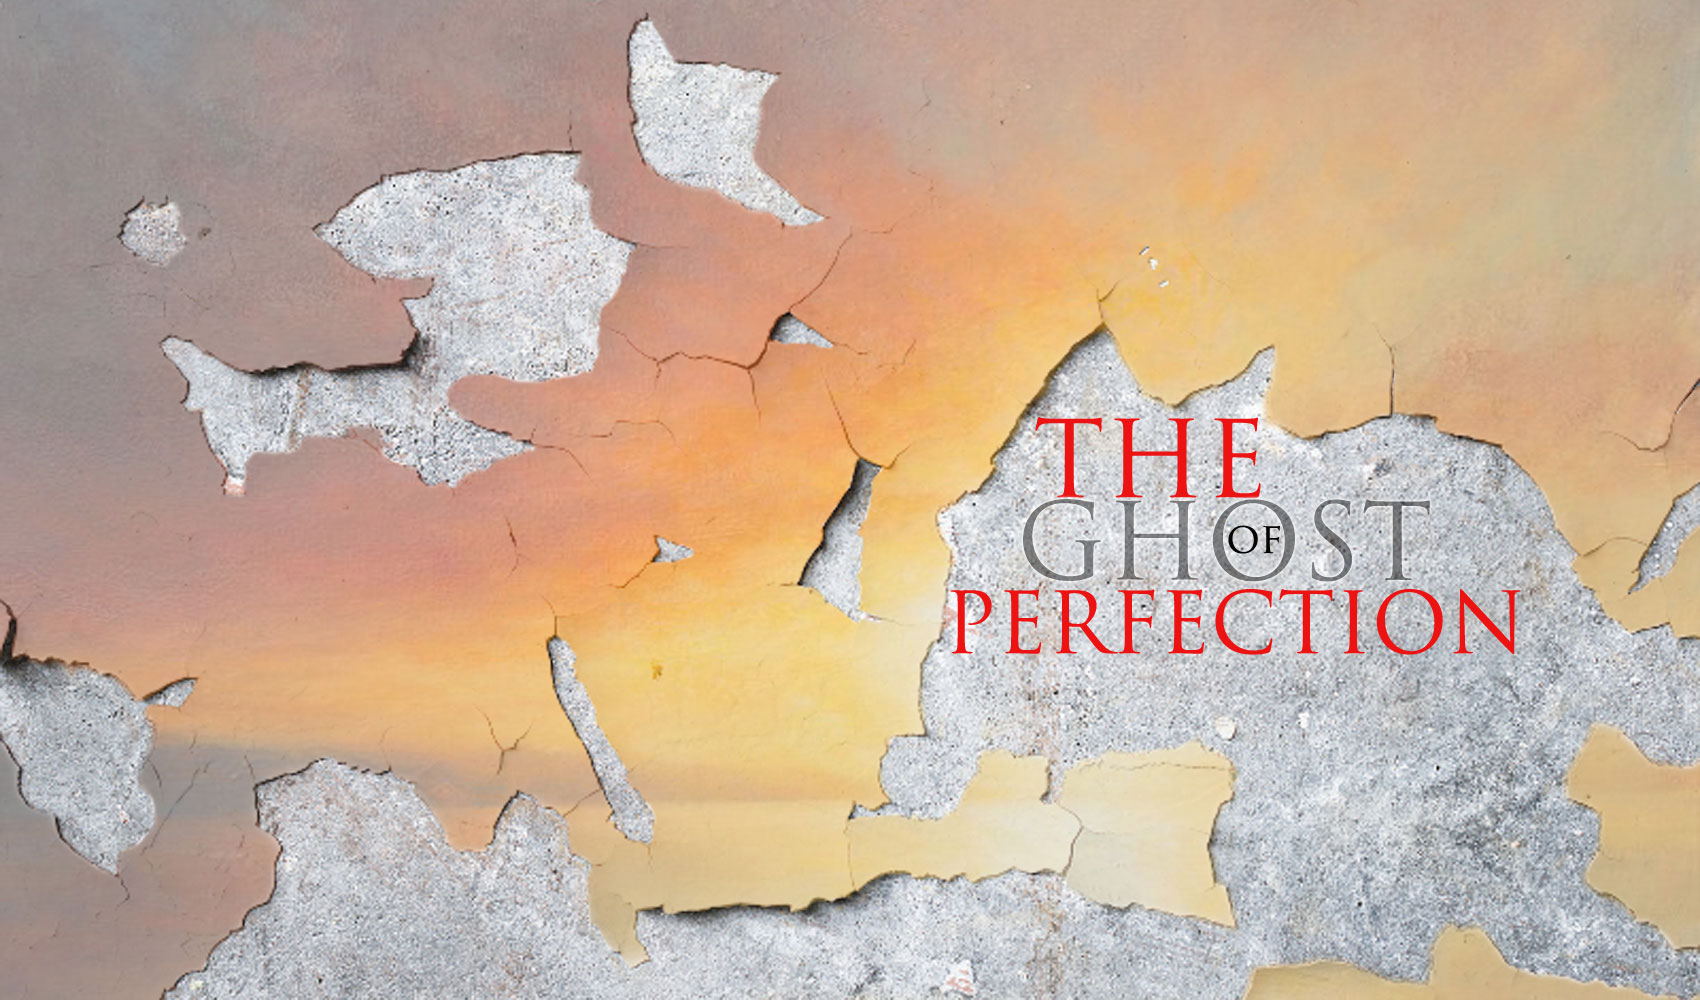 The Ghost of Perfection at Spillwords.com